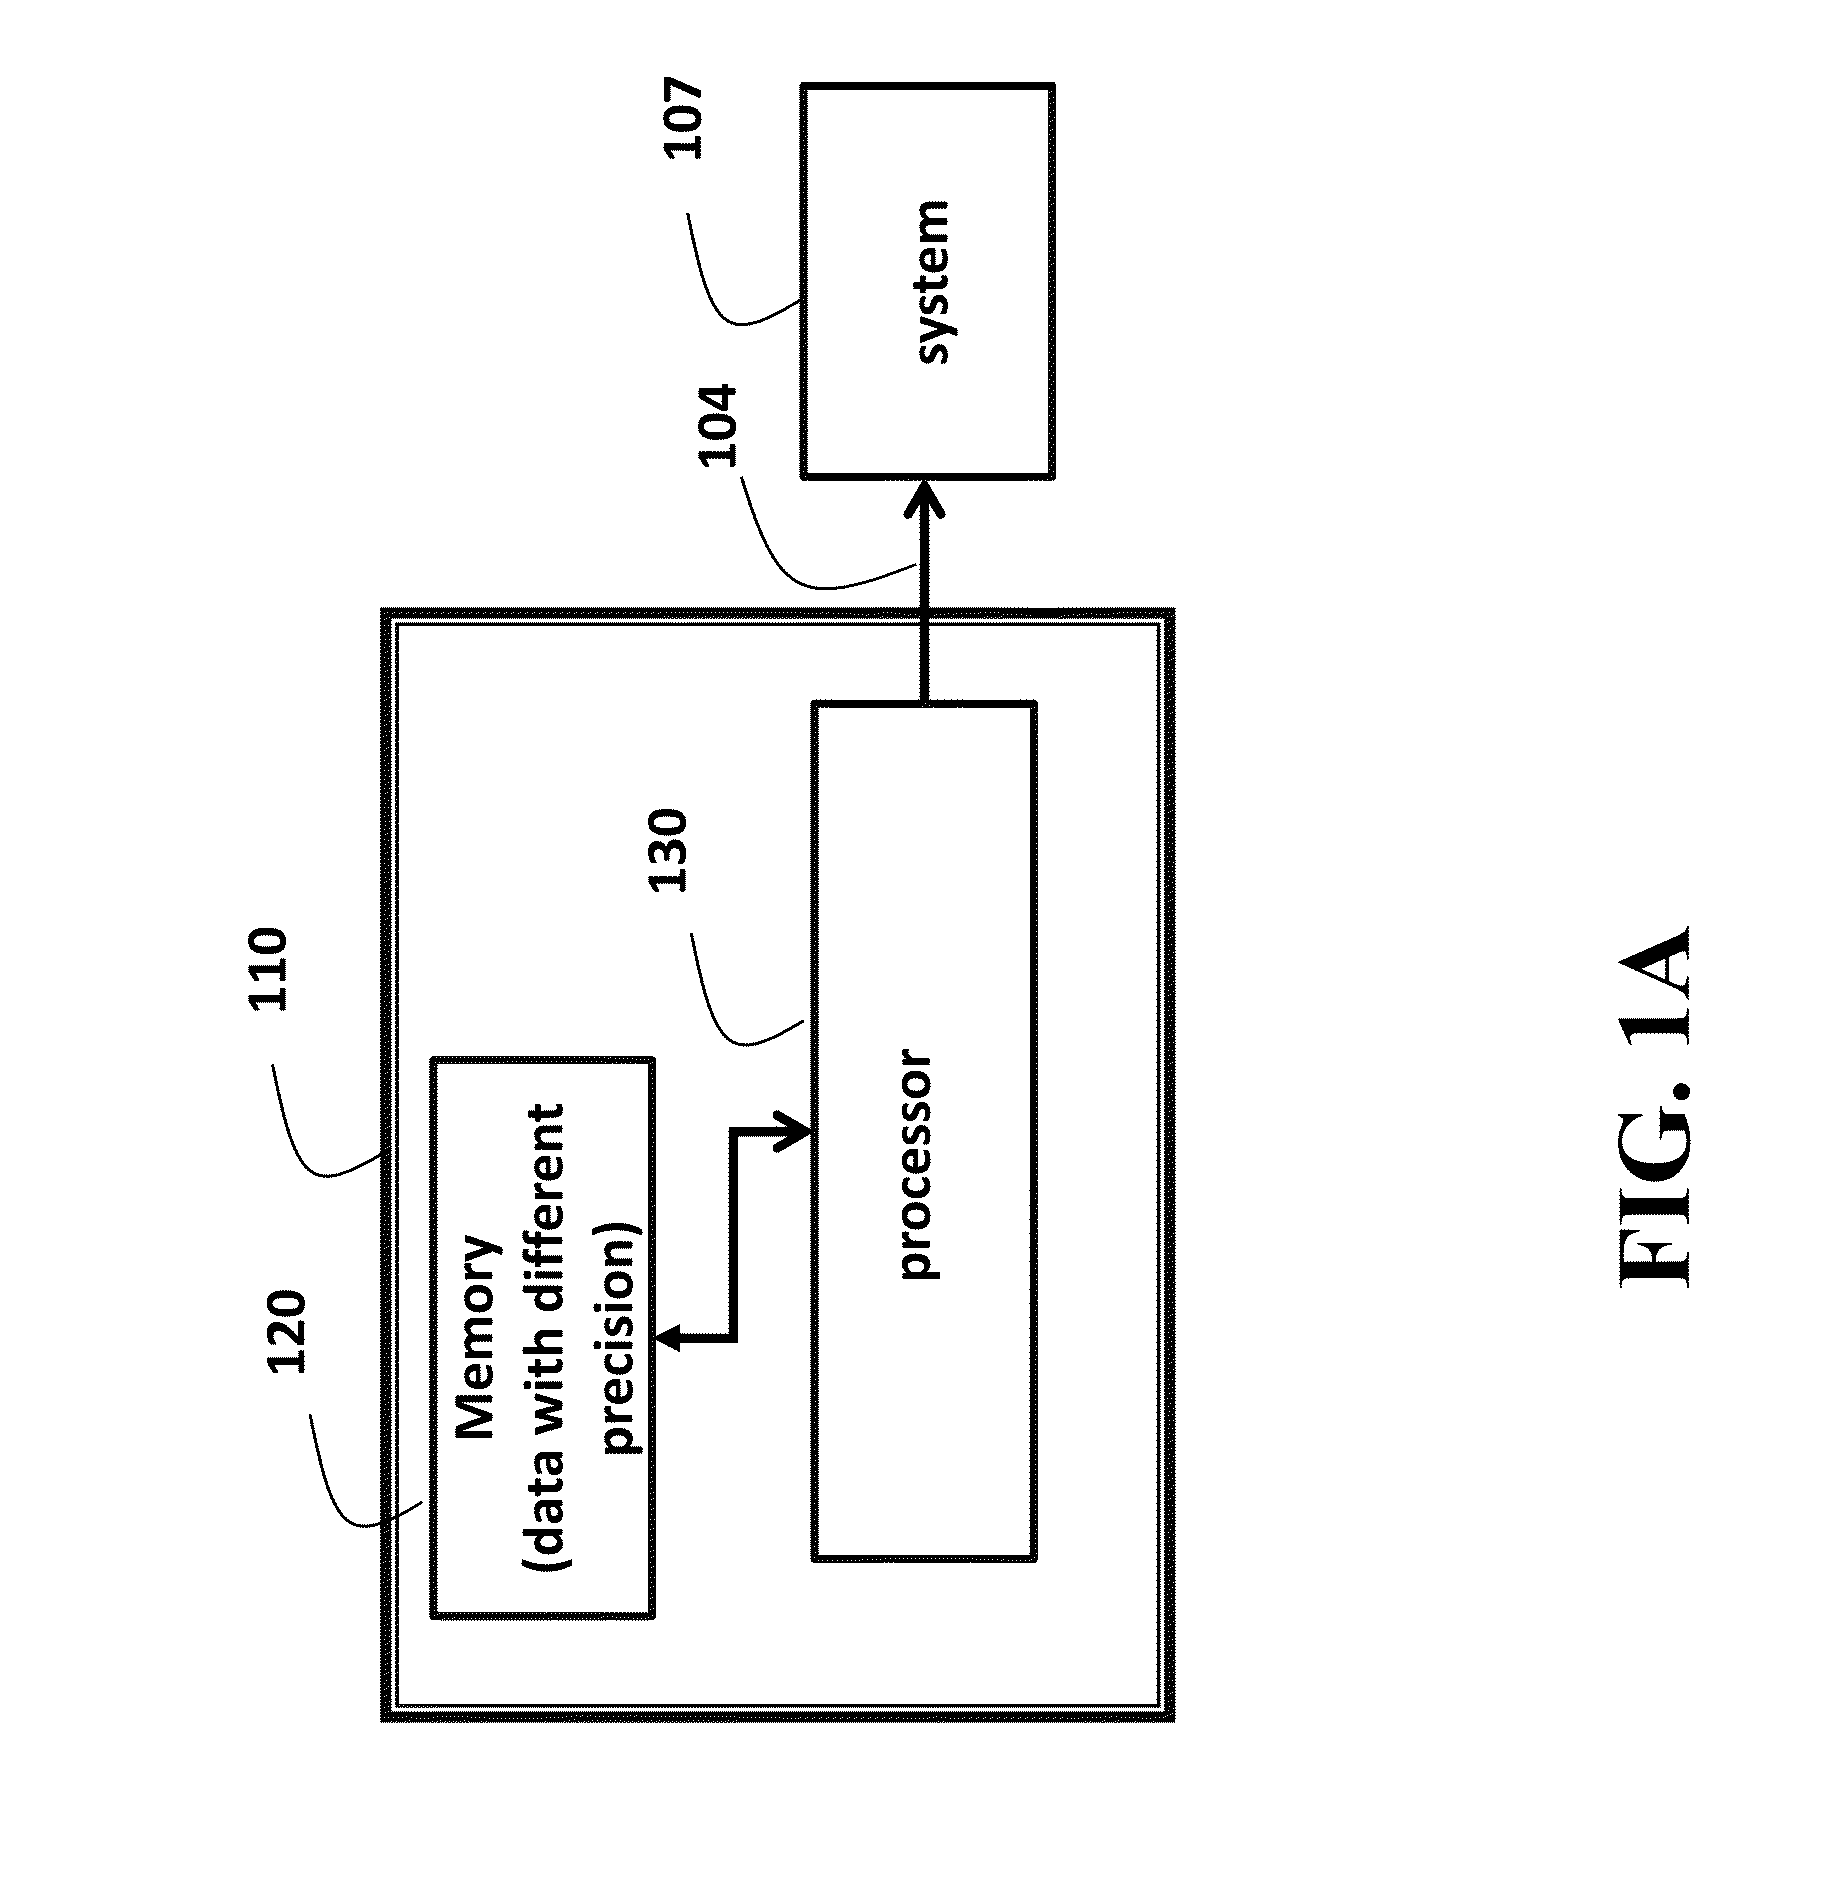 System and Method for Controlling System